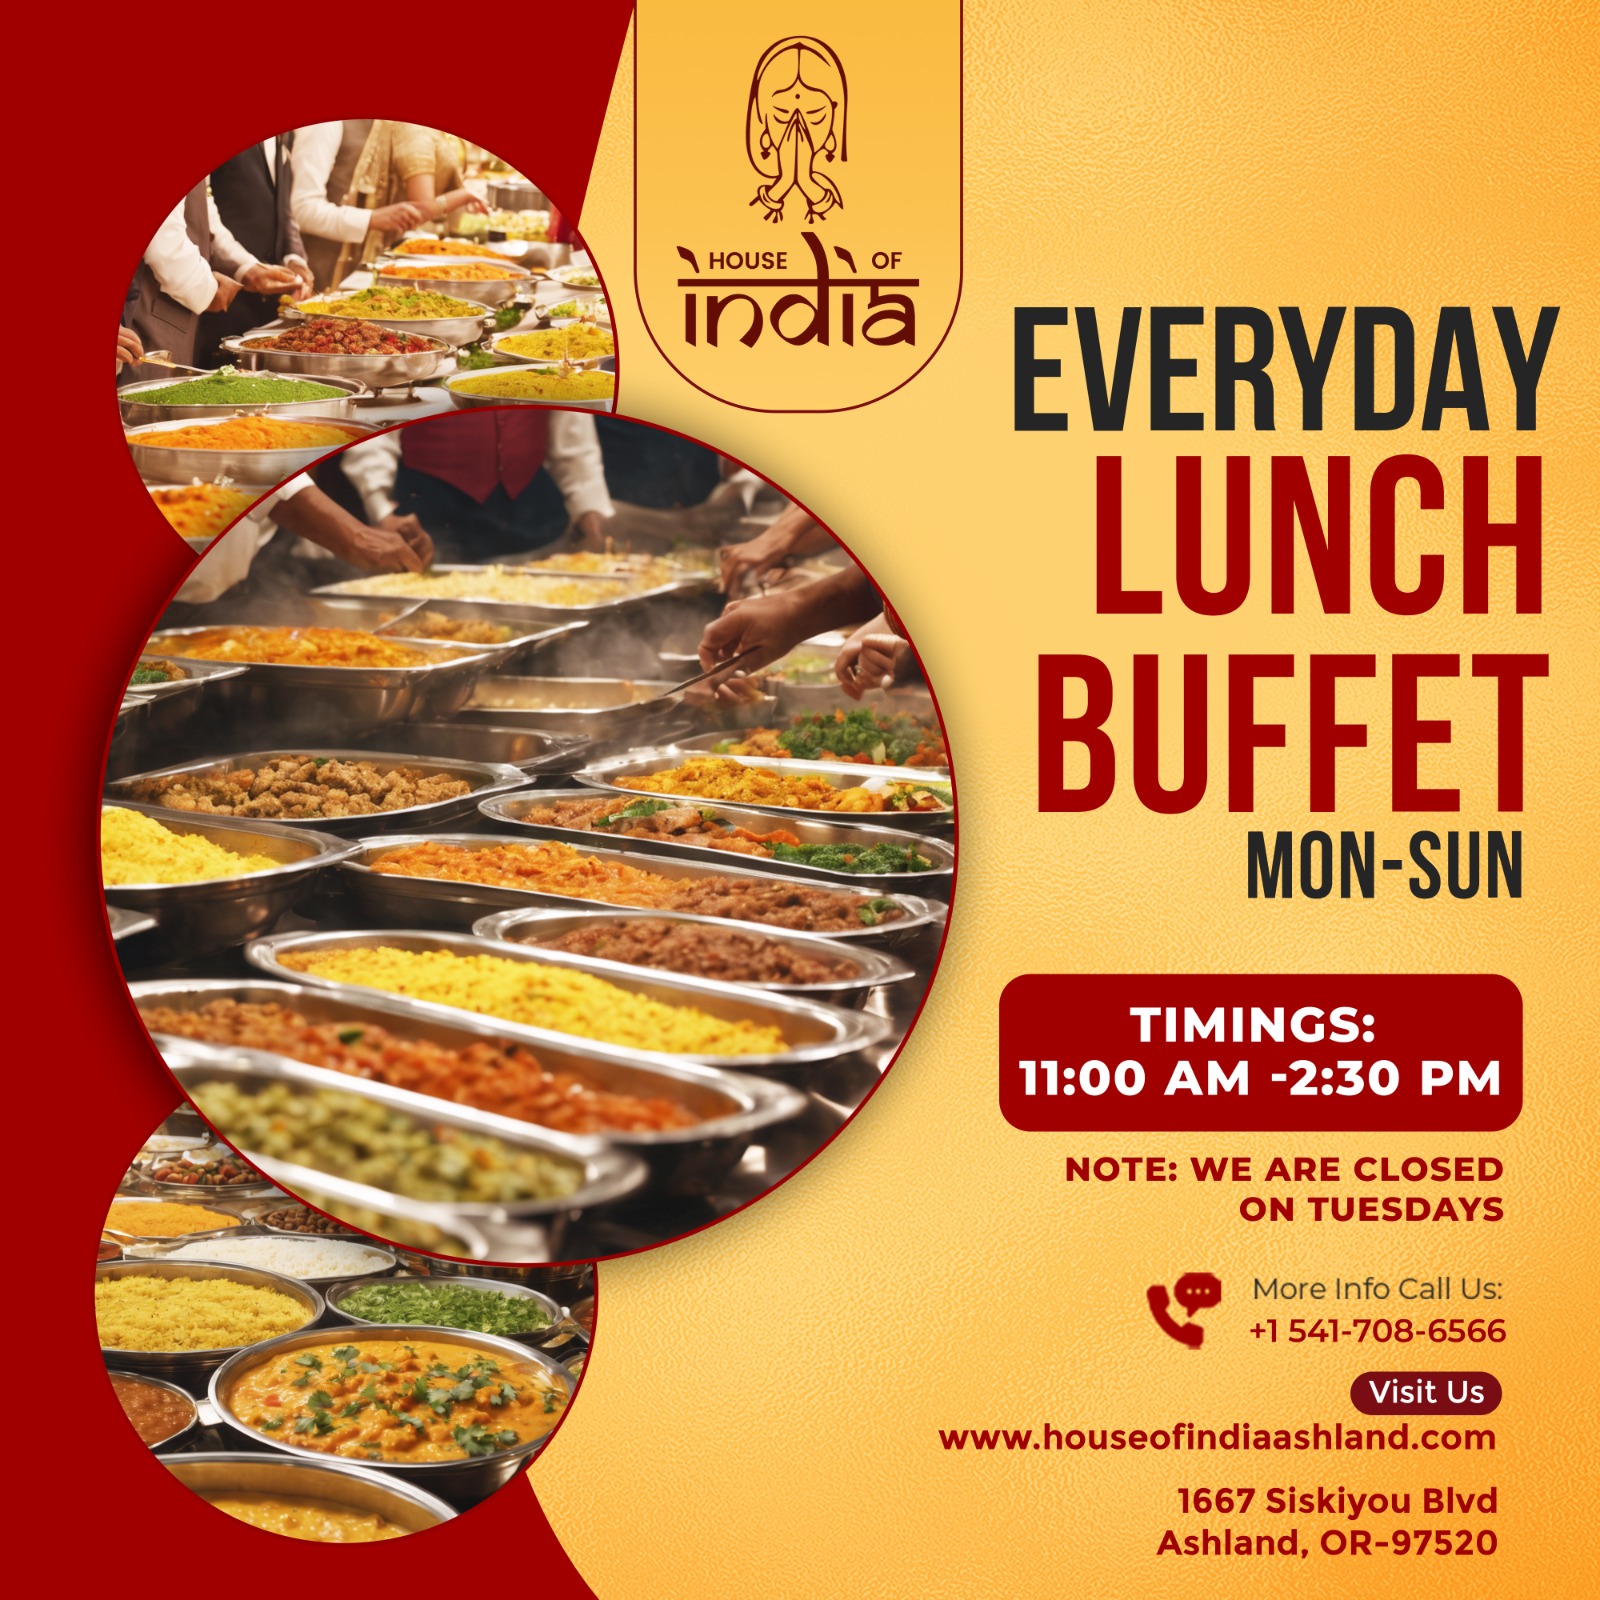 Craving something delicious for lunch? Look no further! Indulge in our mouthwatering Everyday Lunch Buffet MON-SUN from 11:00 am to 2:30 pm! 